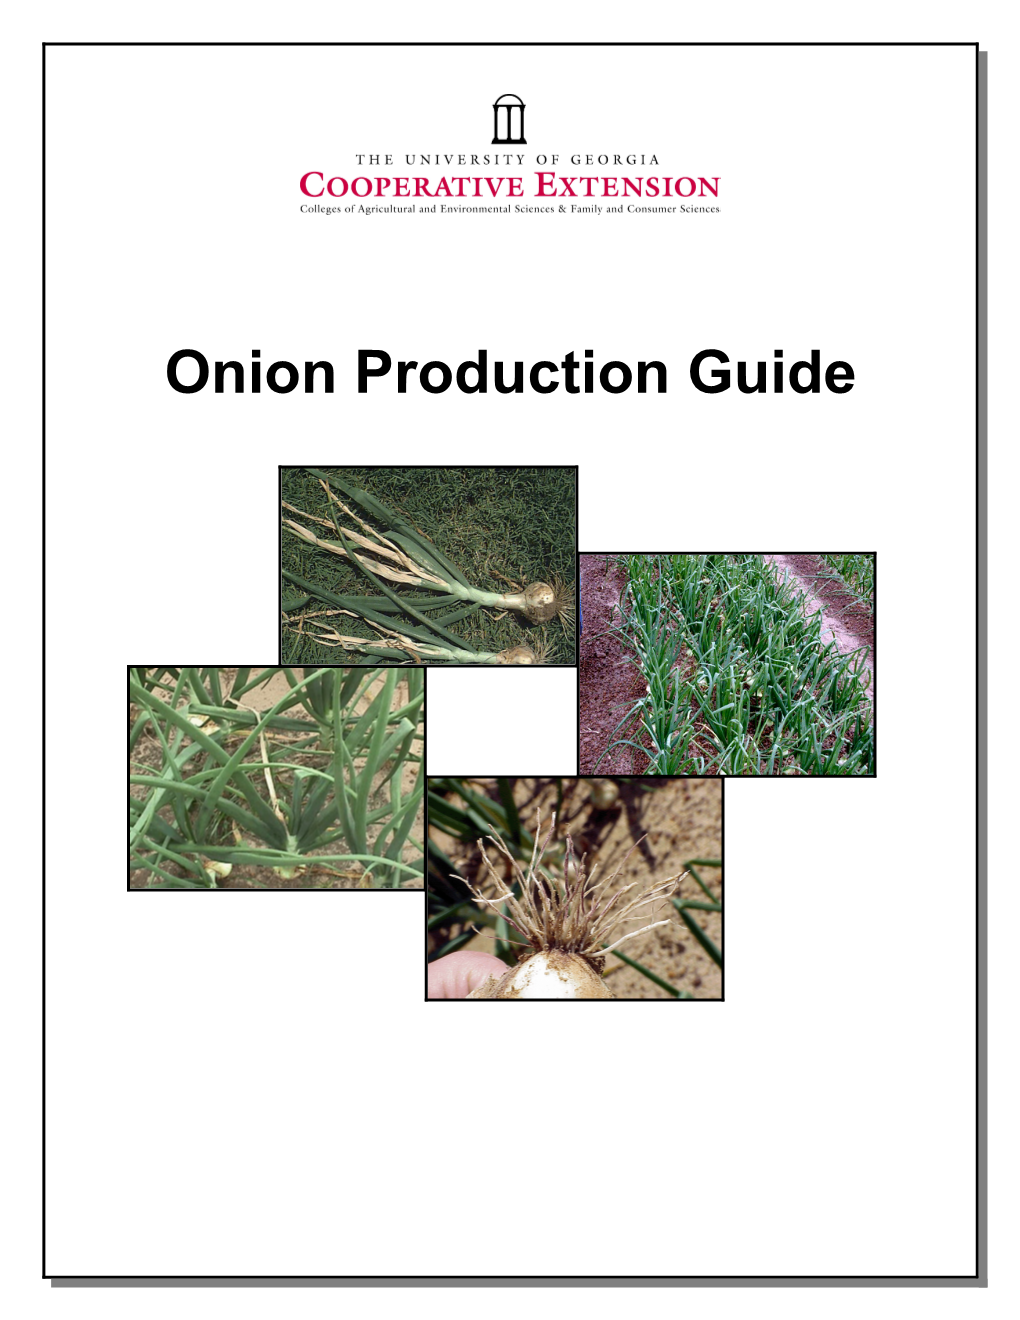 Onion Production Guide Sections and Authors